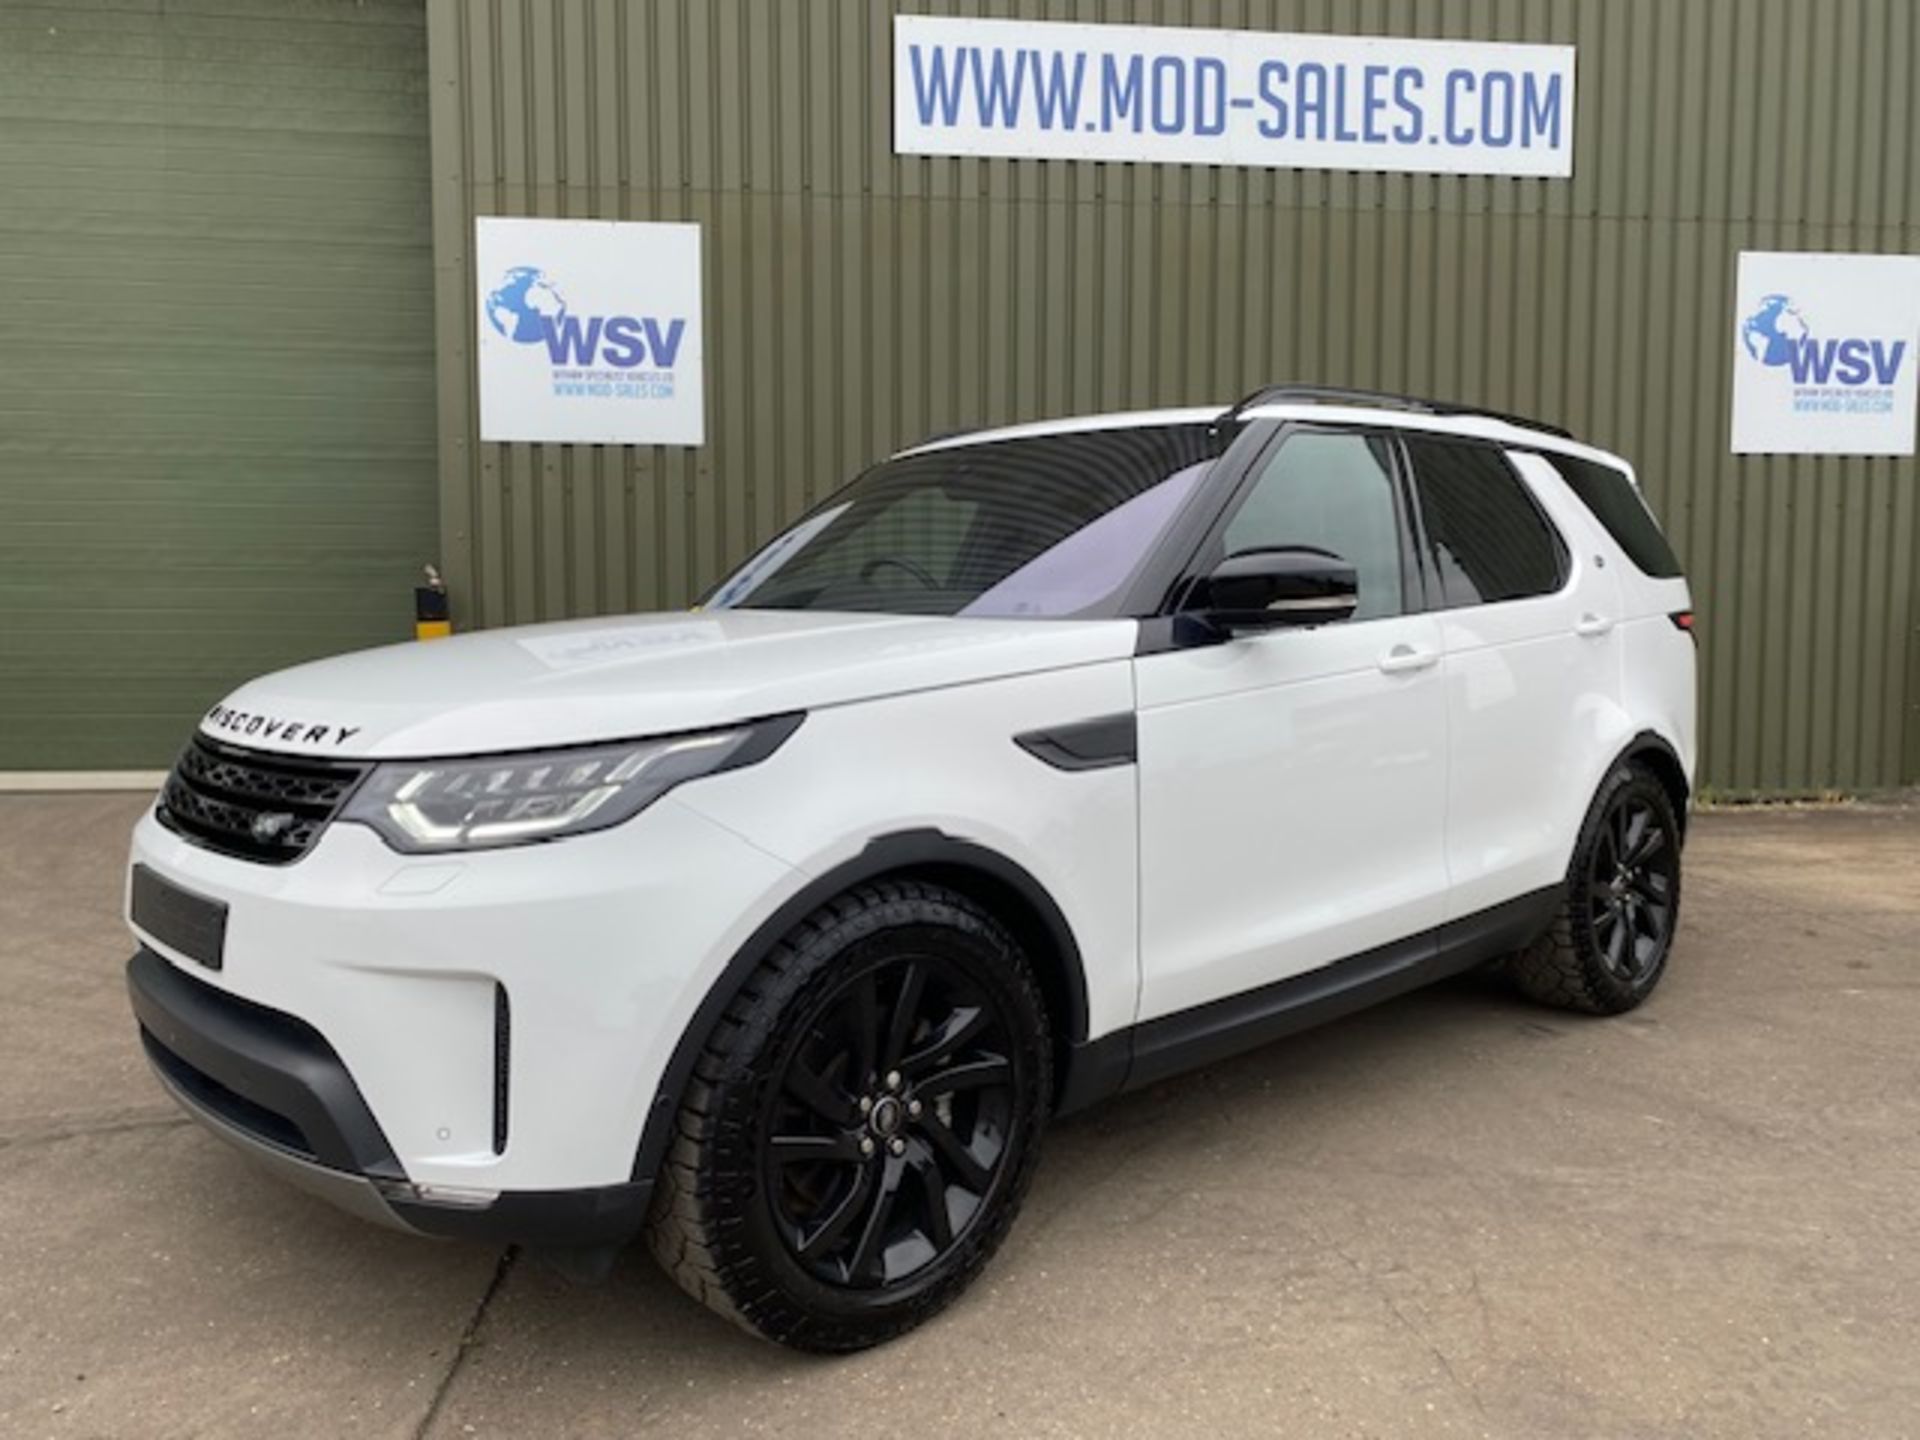 2019 model year Land Rover Discovery 5 3.0 TDV6 HSE Luxury RHD ONLY 5778 MILES! - Bild 3 aus 21